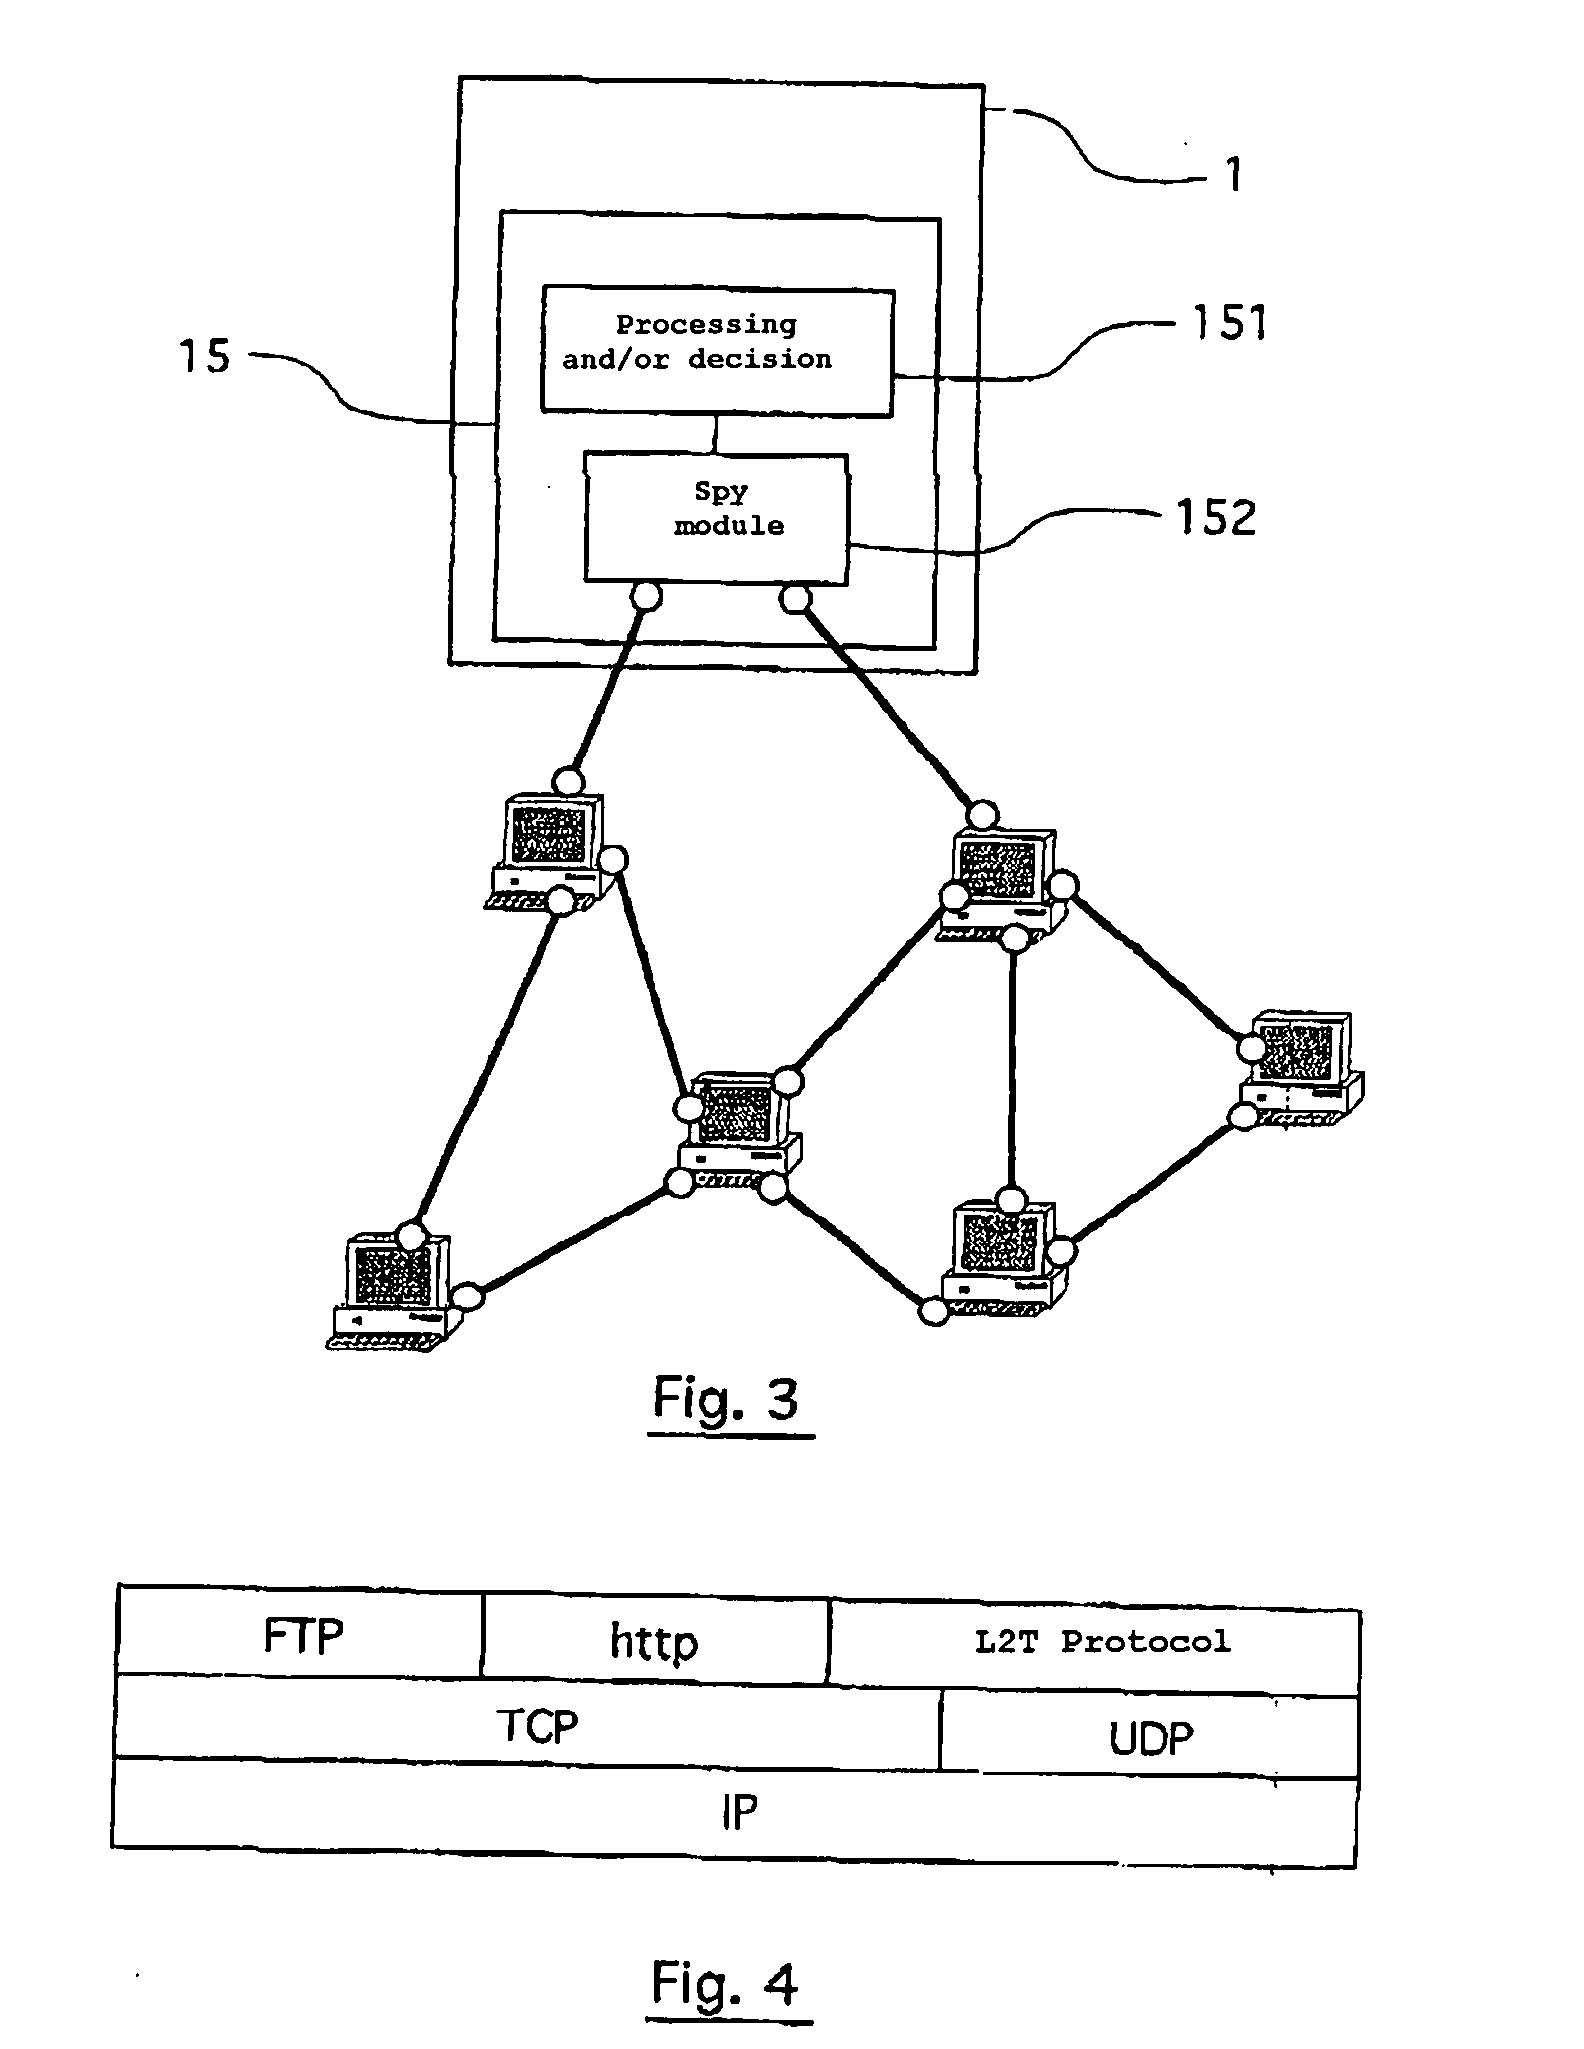 Method for communication and/or machine resource sharing among plurality of members of a community in a communication network